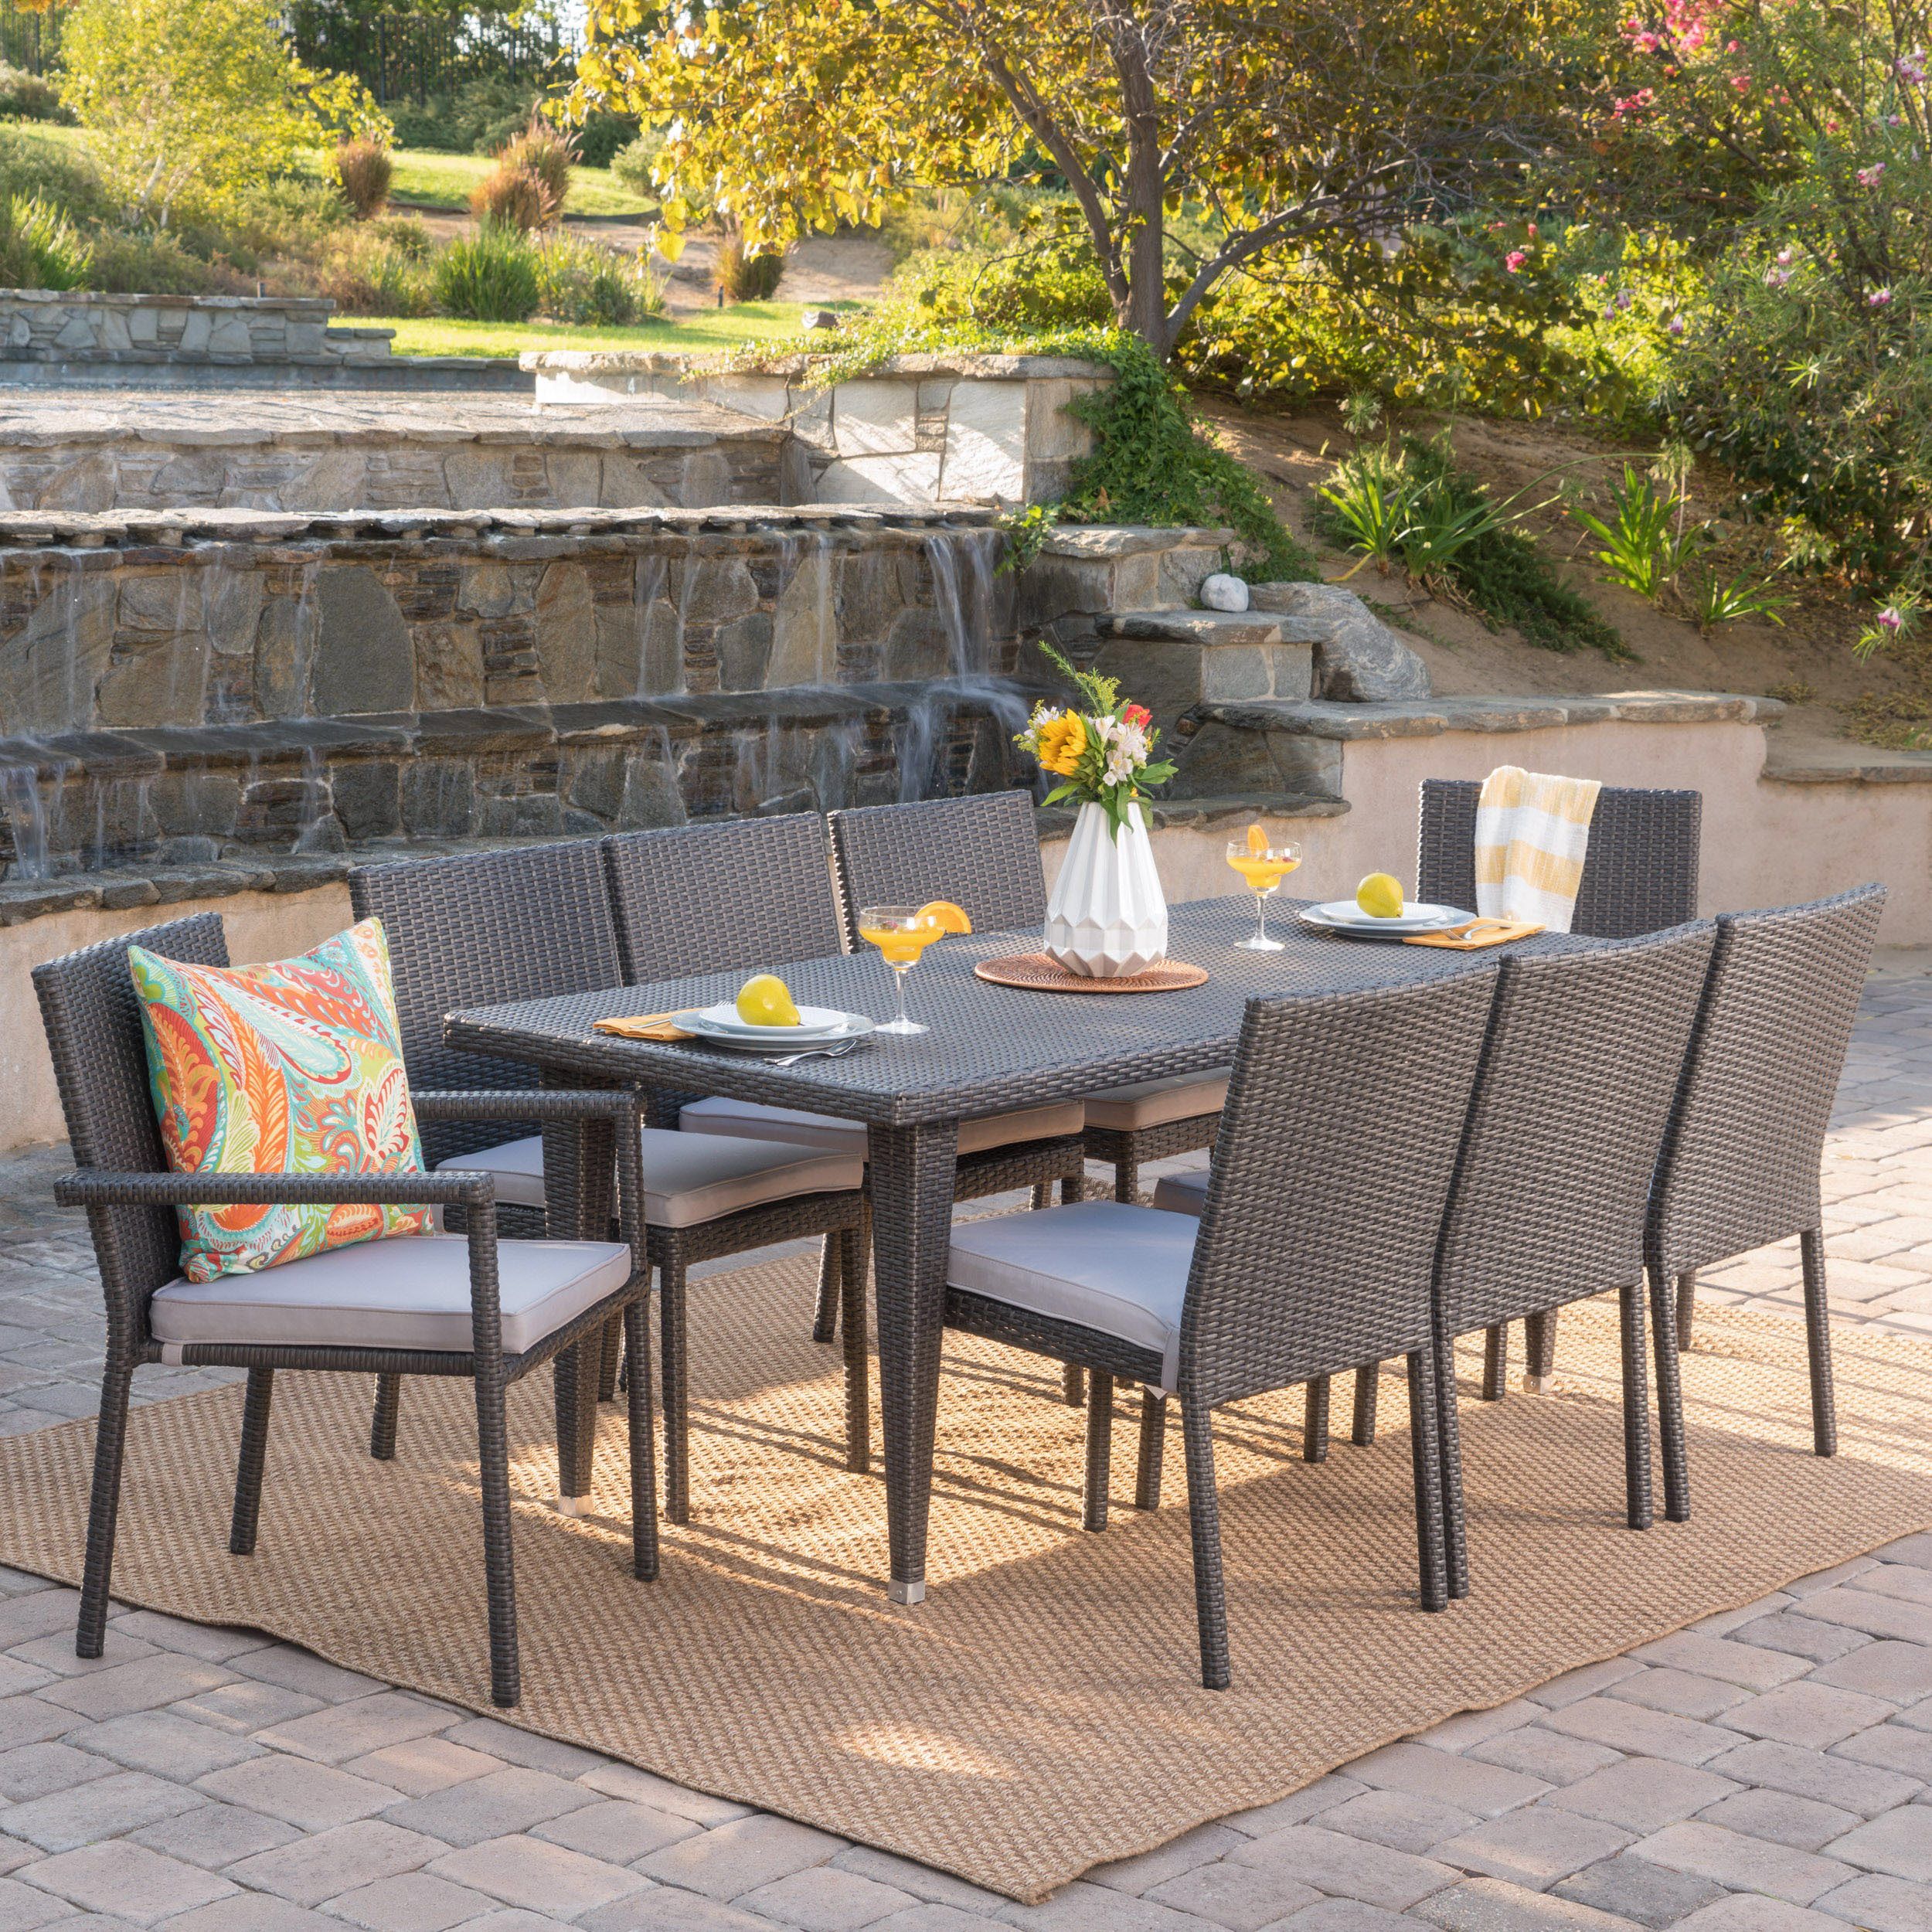 Granger Outdoor 9 Piece Wicker Rectangular Dining Set With Cushions Pertaining To Large Rectangular Patio Dining Sets (View 2 of 15)